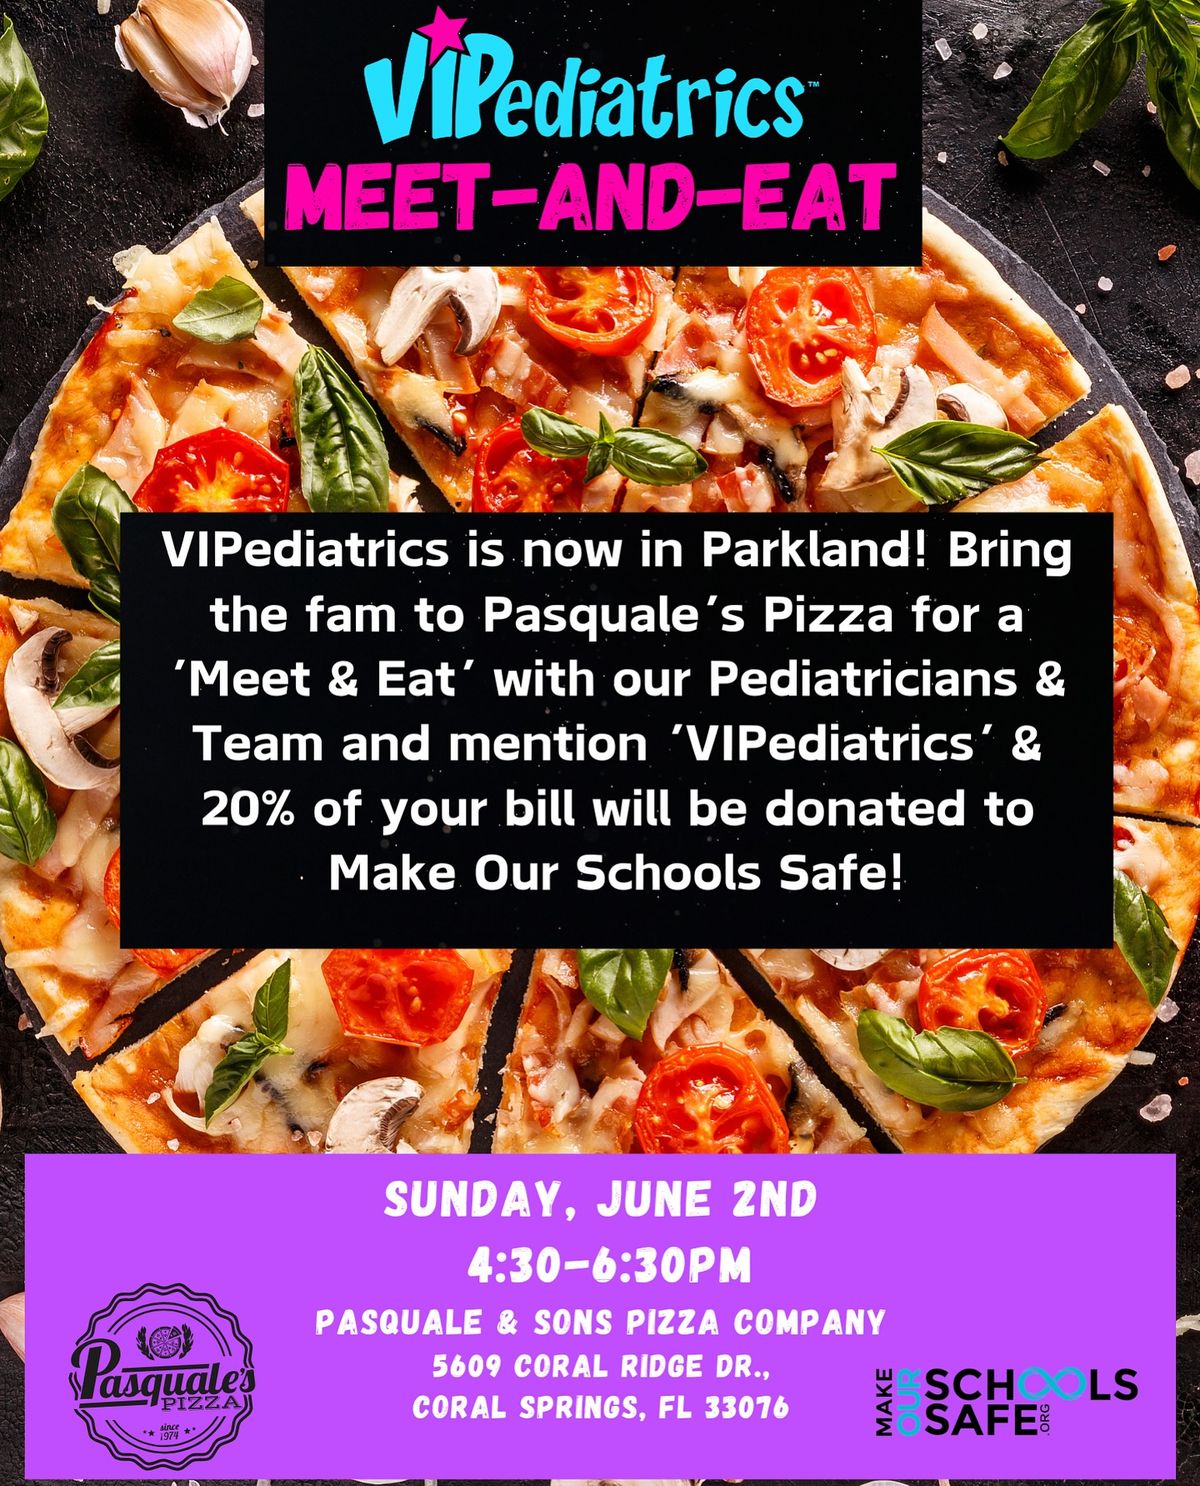 VIPediatrics-On-Tour Kickoff at Pasquale's Pizza to Support Make Our Schools Safe!